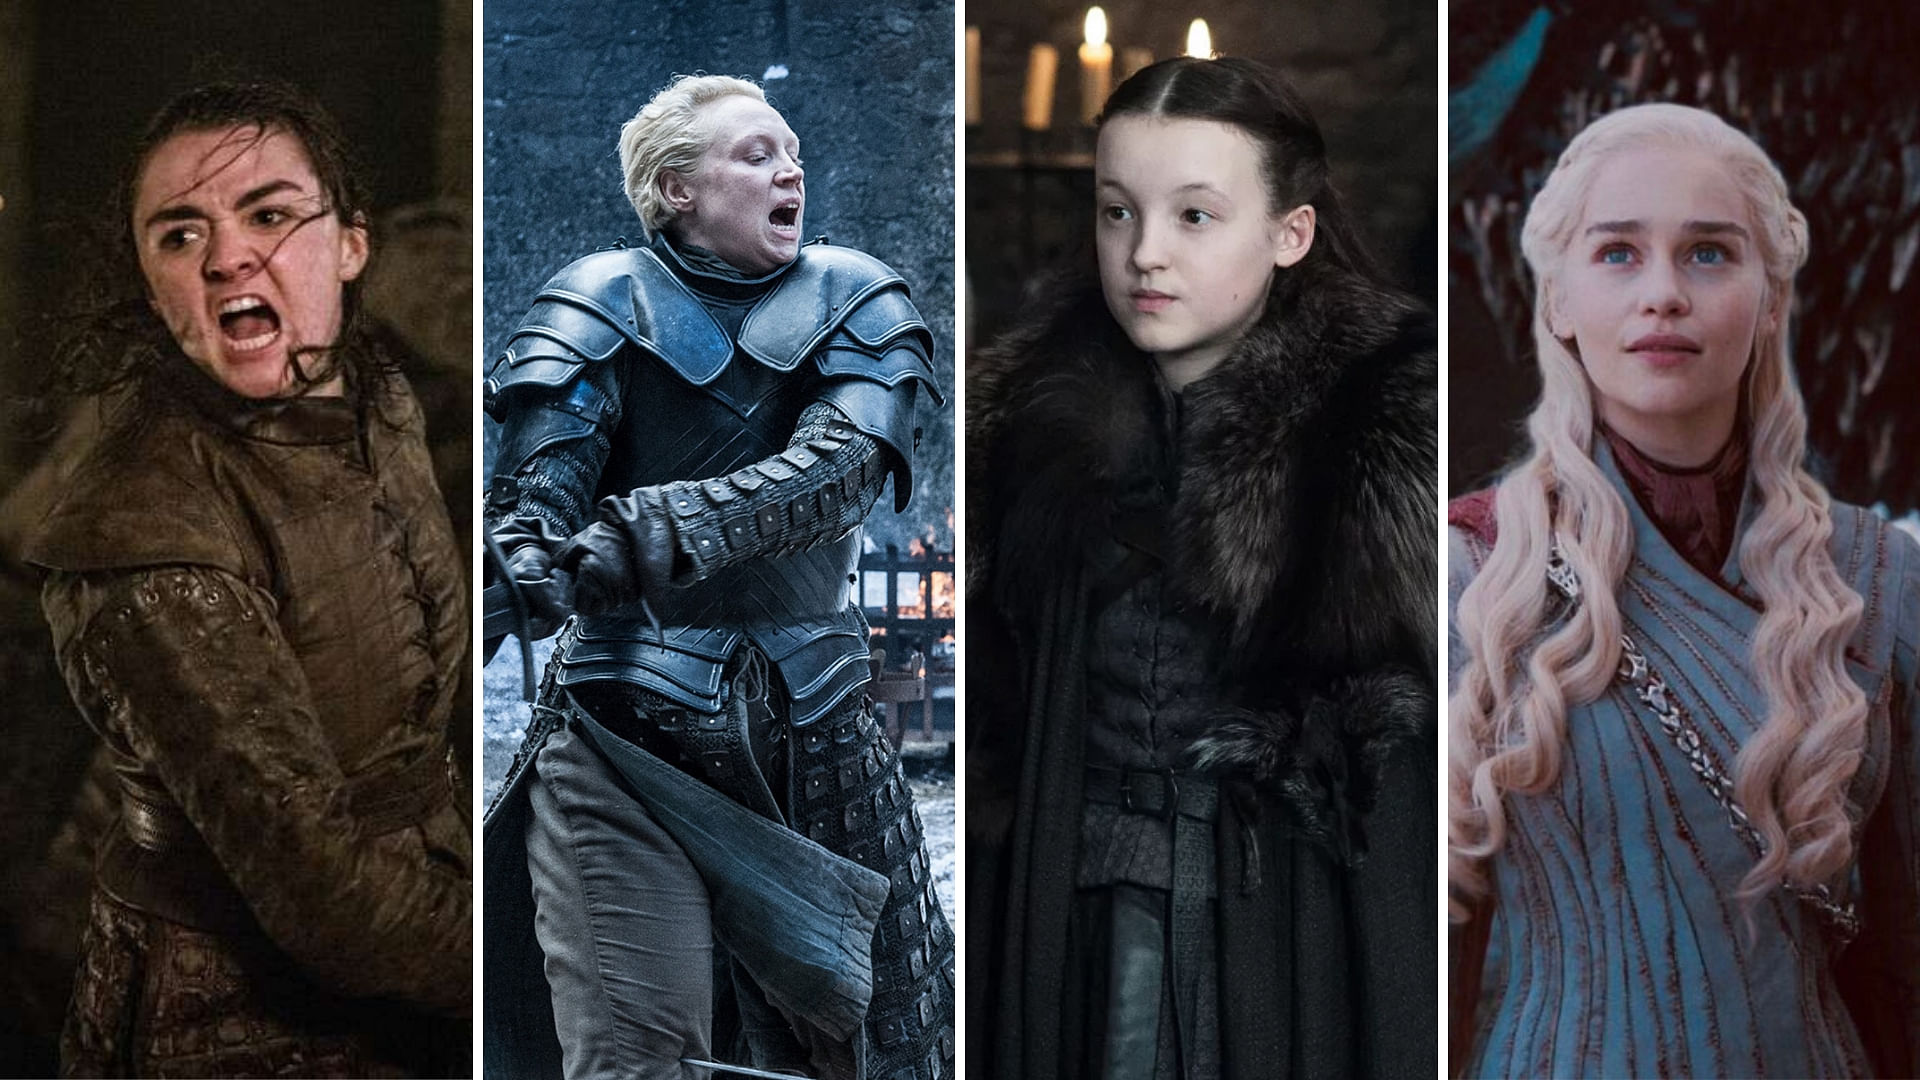 From Arya Stark to Lyanna Mormont, we honour the women of <i>Game of Thrones</i>.